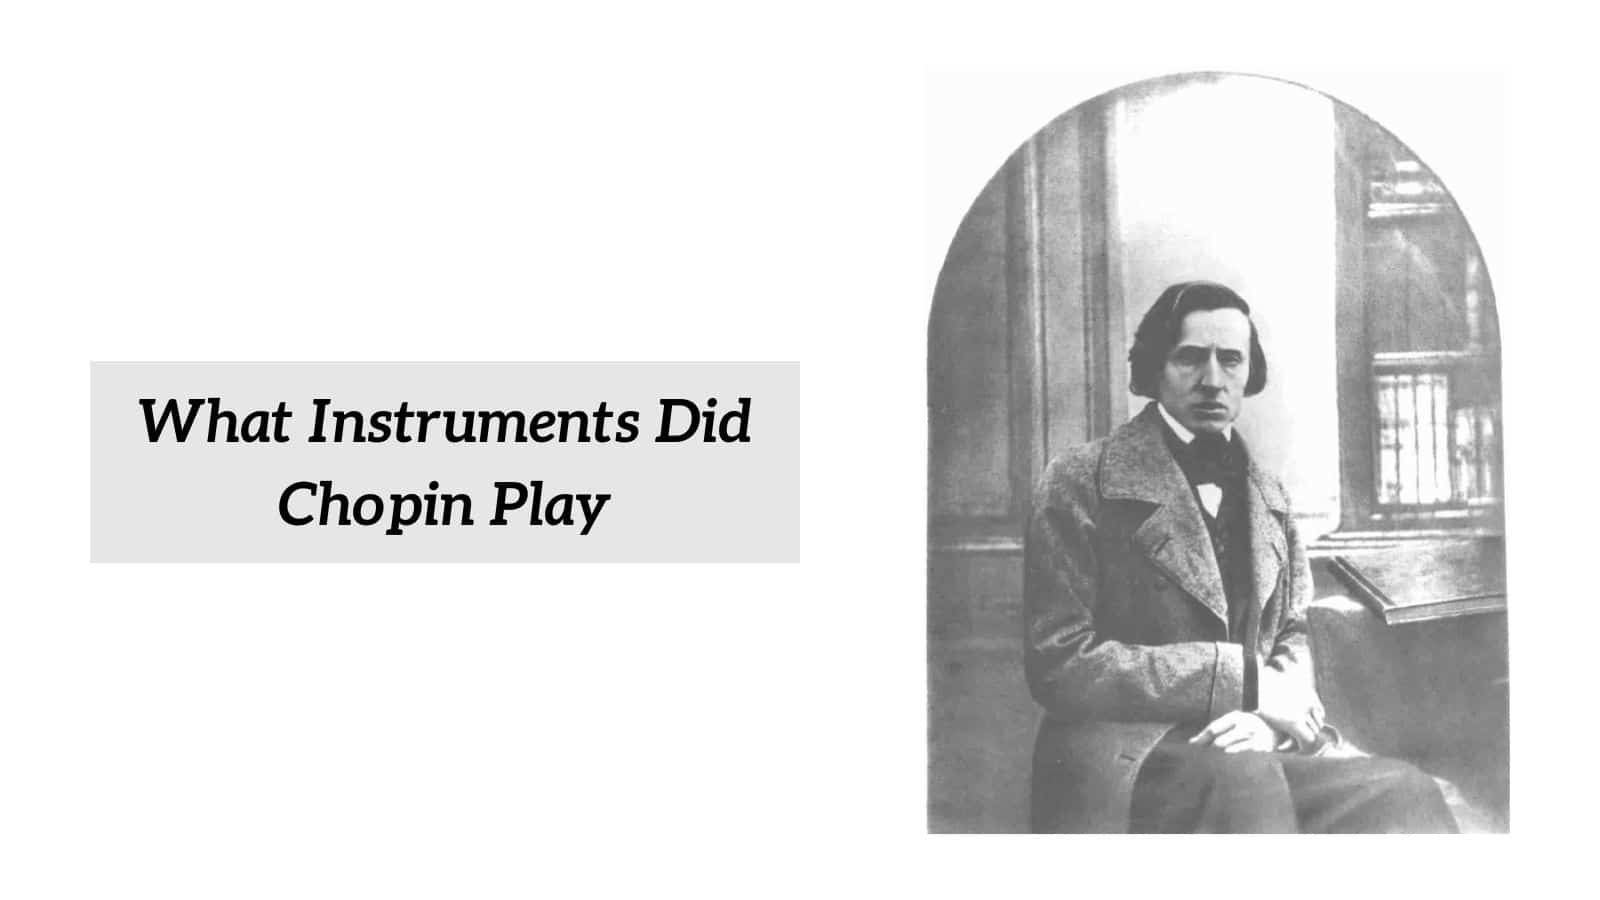 What Instruments Did Chopin Play